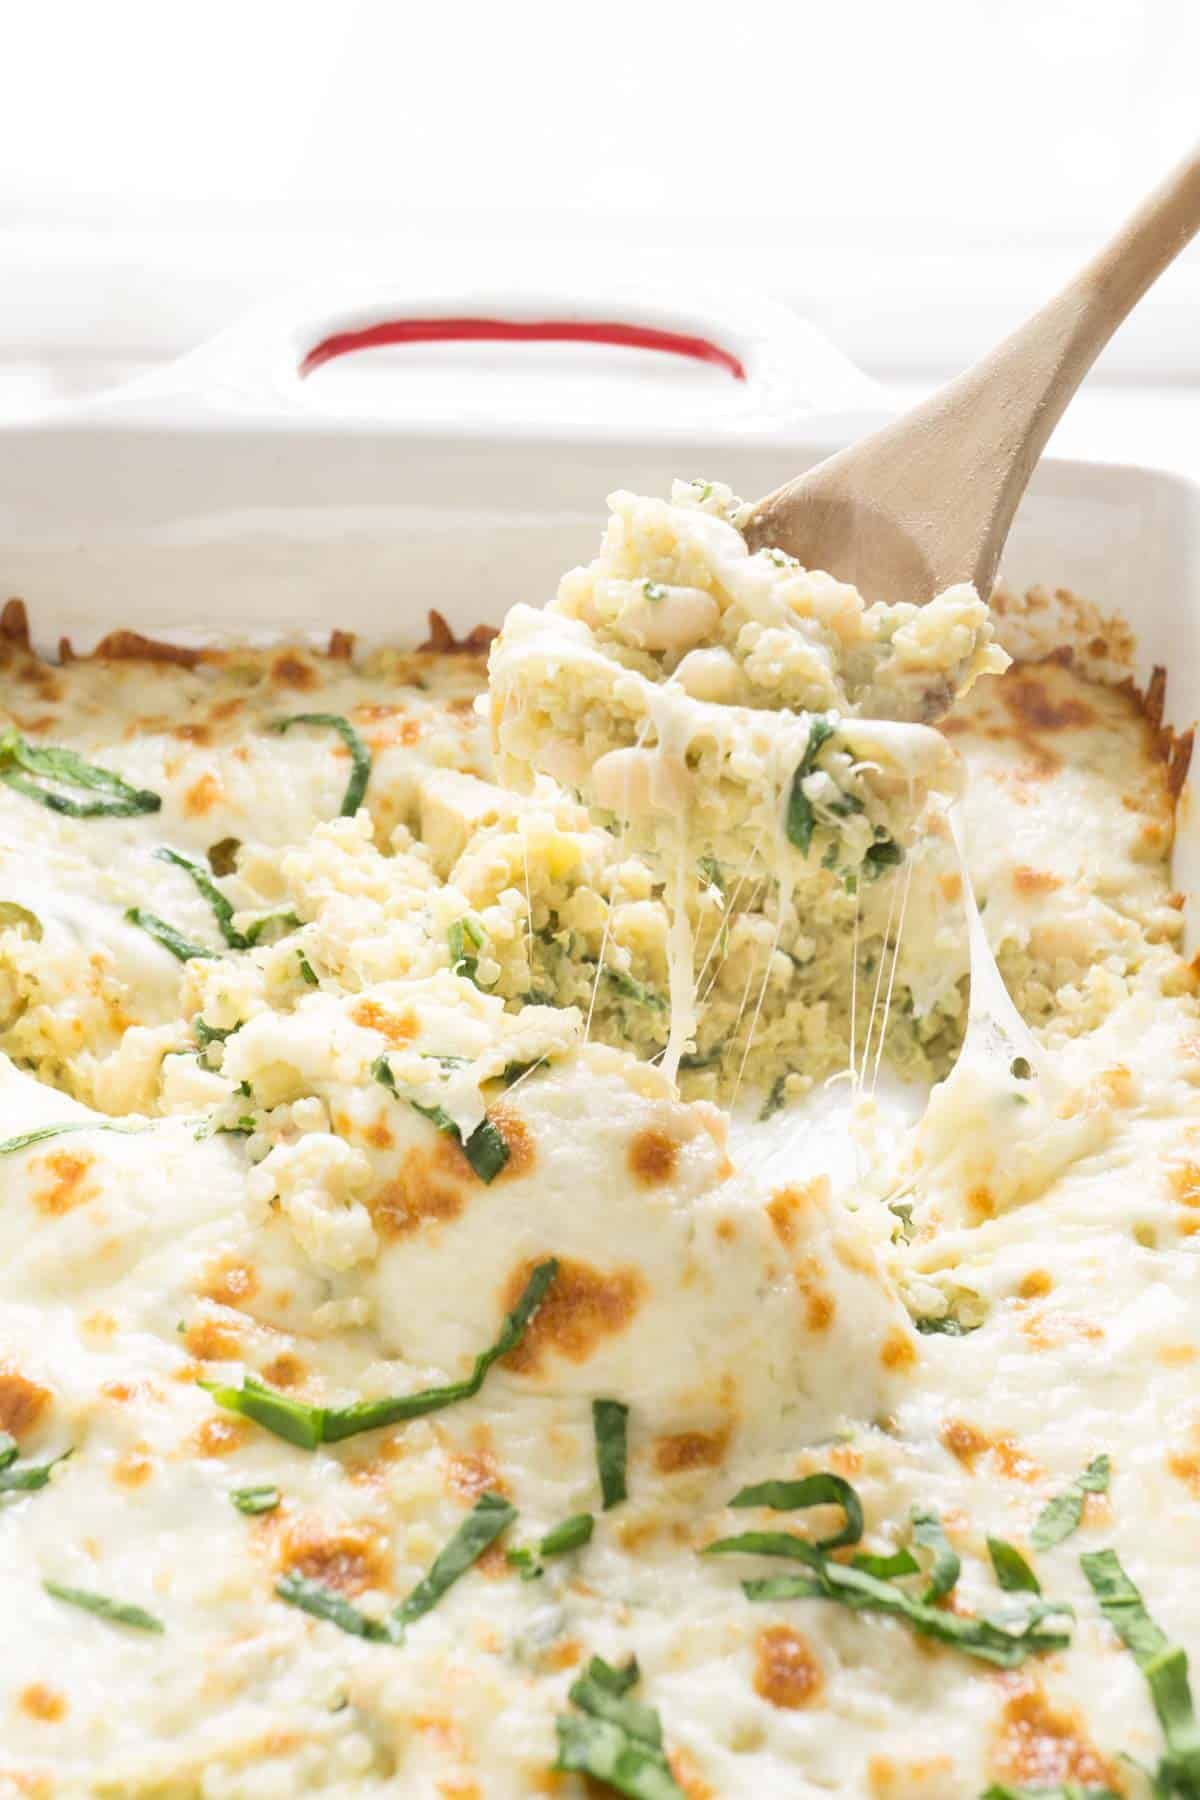 Juicy spinach and artichoke quinoa bake in a white casserole with a wooden spoon.